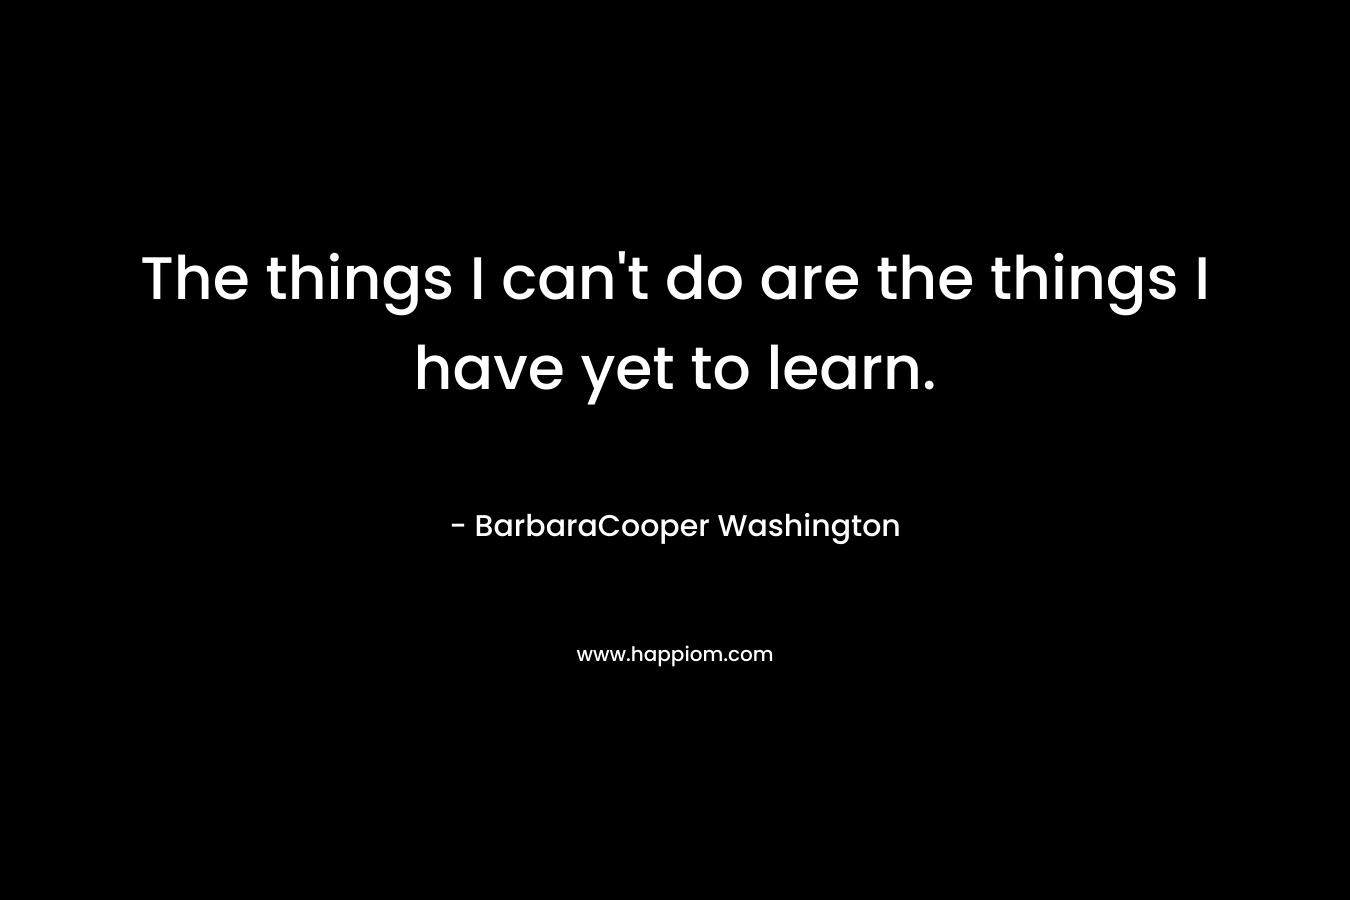 The things I can't do are the things I have yet to learn.